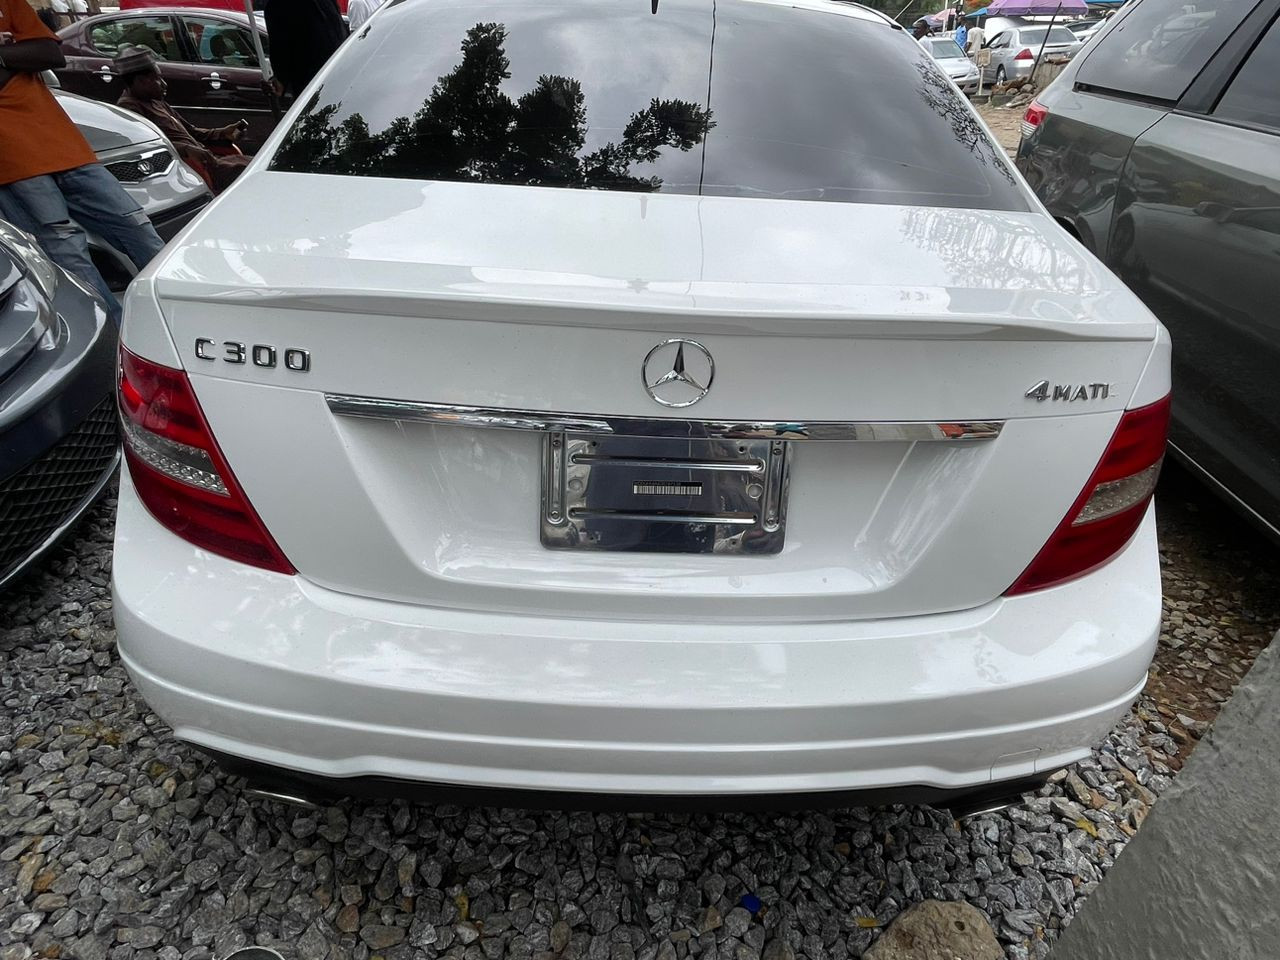 Foreign Used 2013 First Body C300 with Black Engine in Abuja